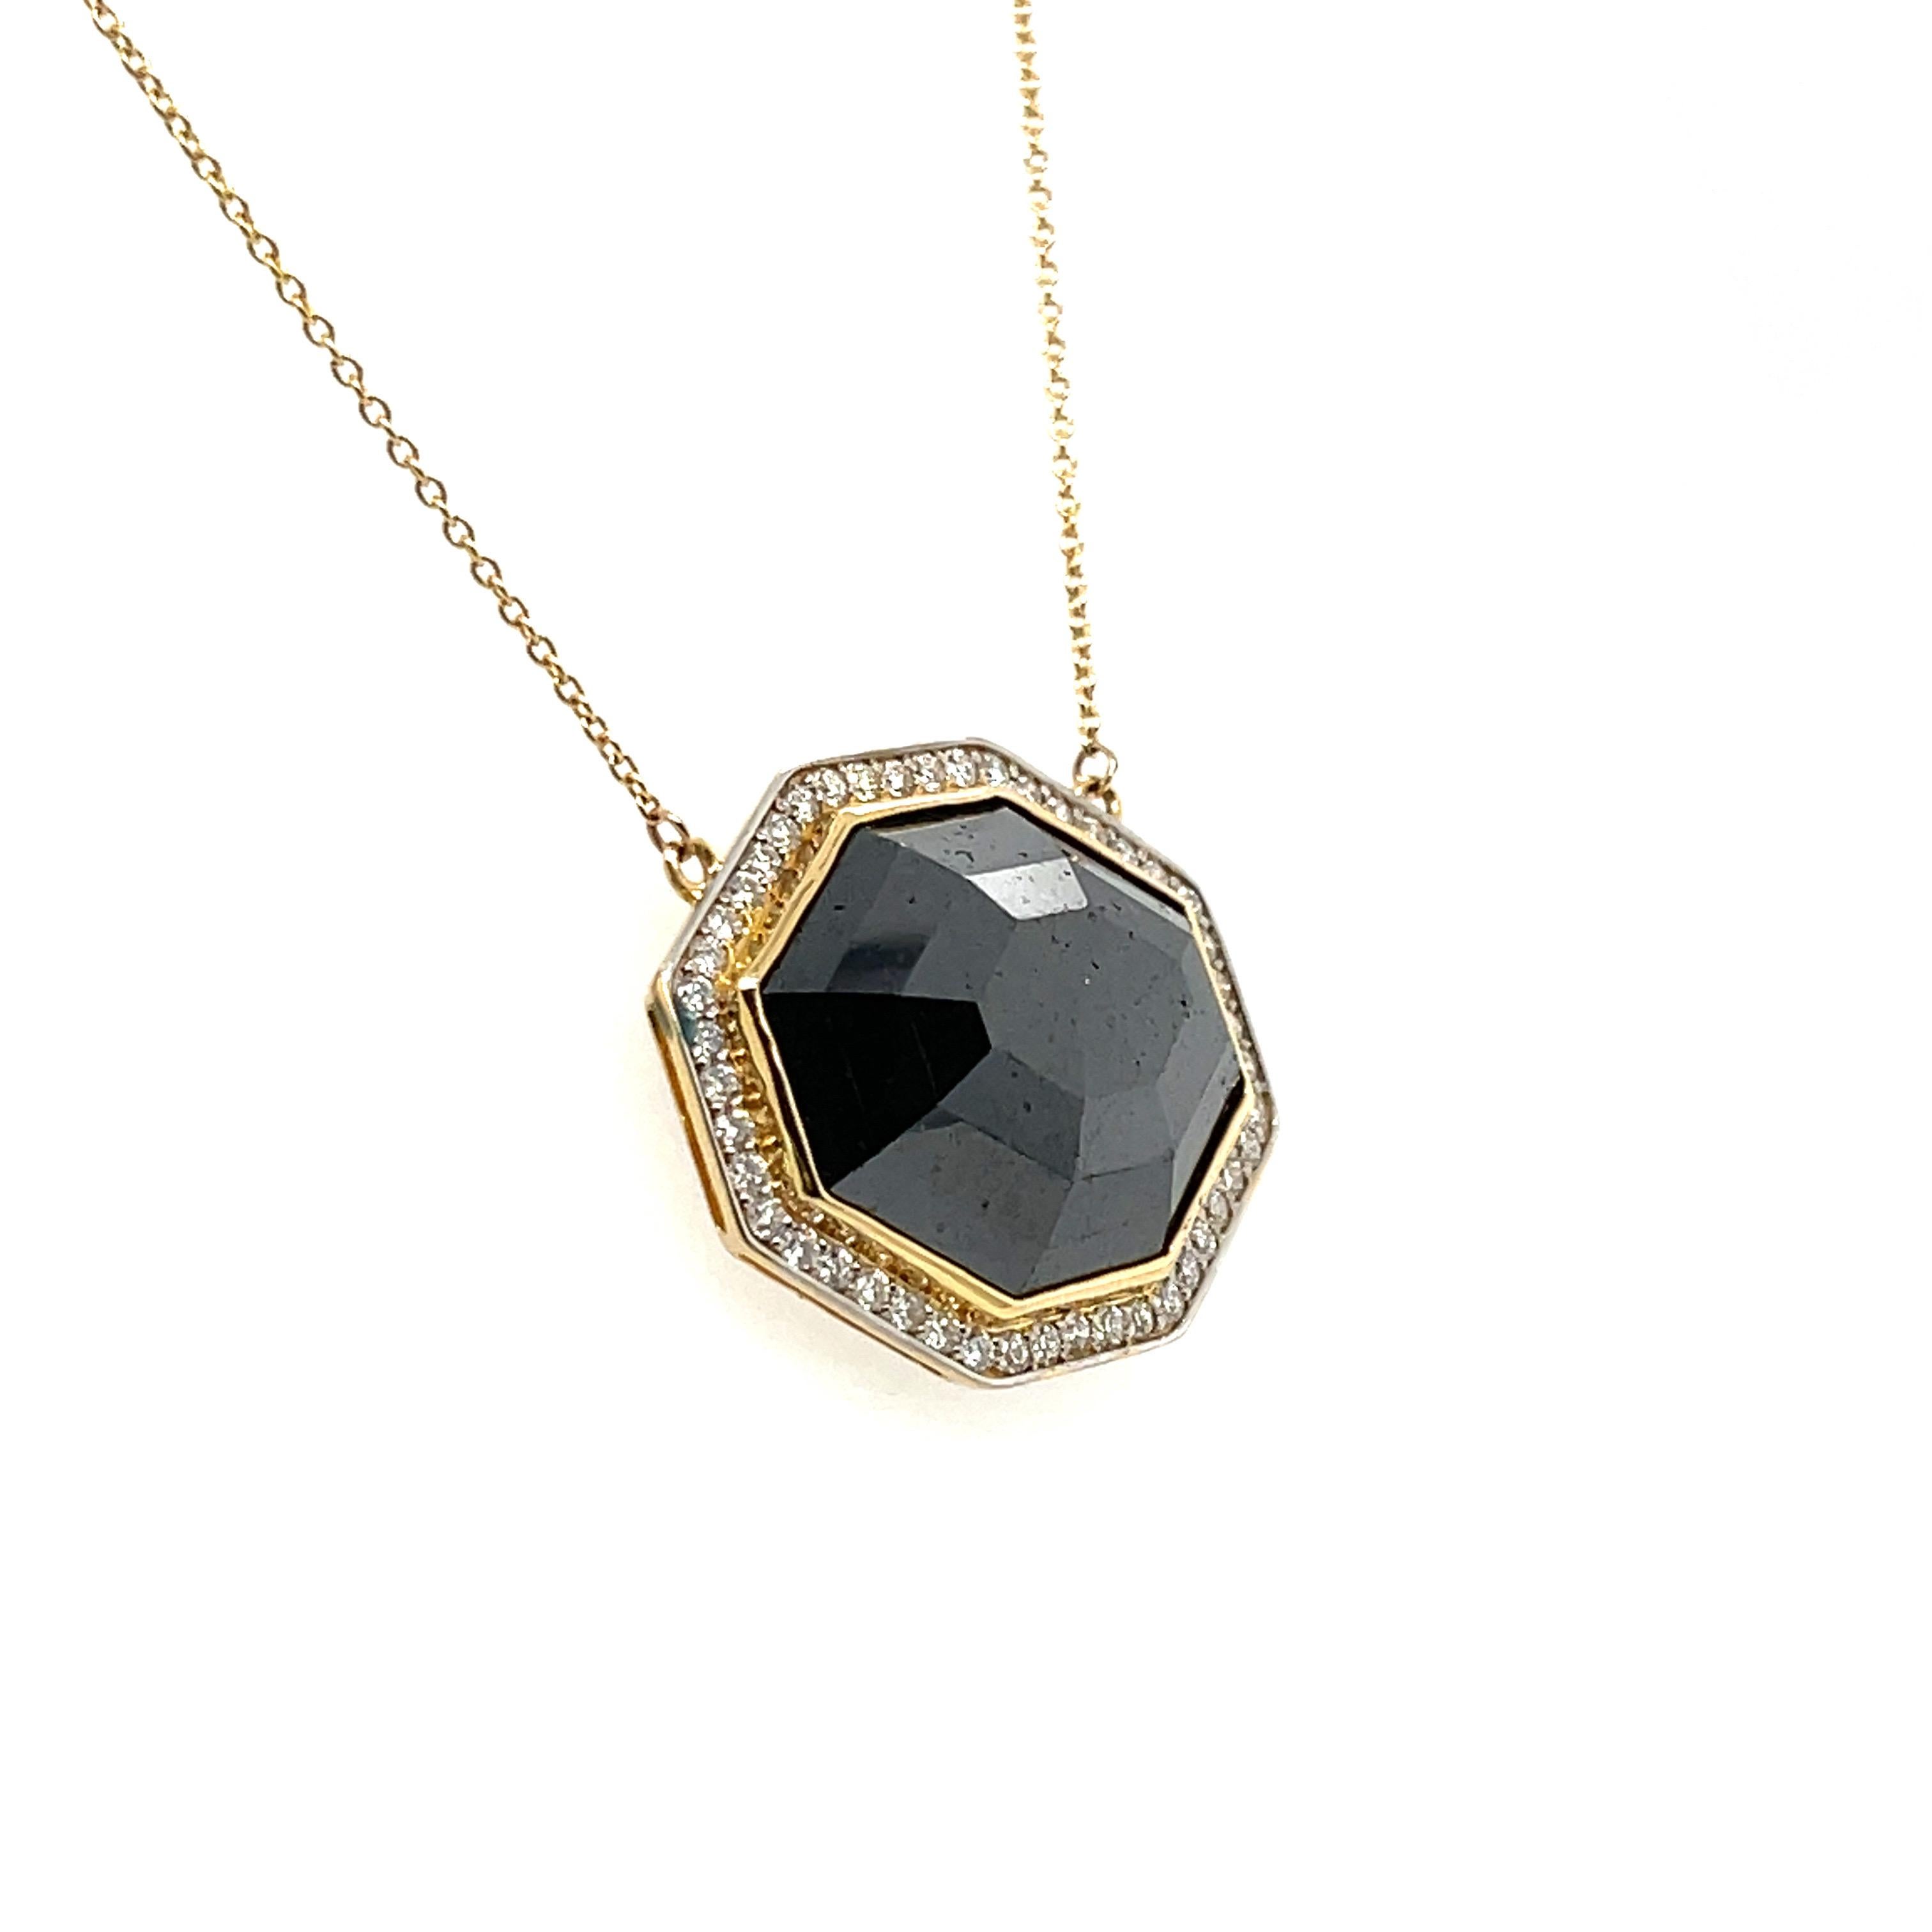 Black octagonal Diamond, featuring natural white diamonds in a beautifully crafted pendant and necklace, complimented by a stunning polished finish design.

One ladies - 18ct yellow gold octagonal pendant on a 18ct yellow gold oval link with